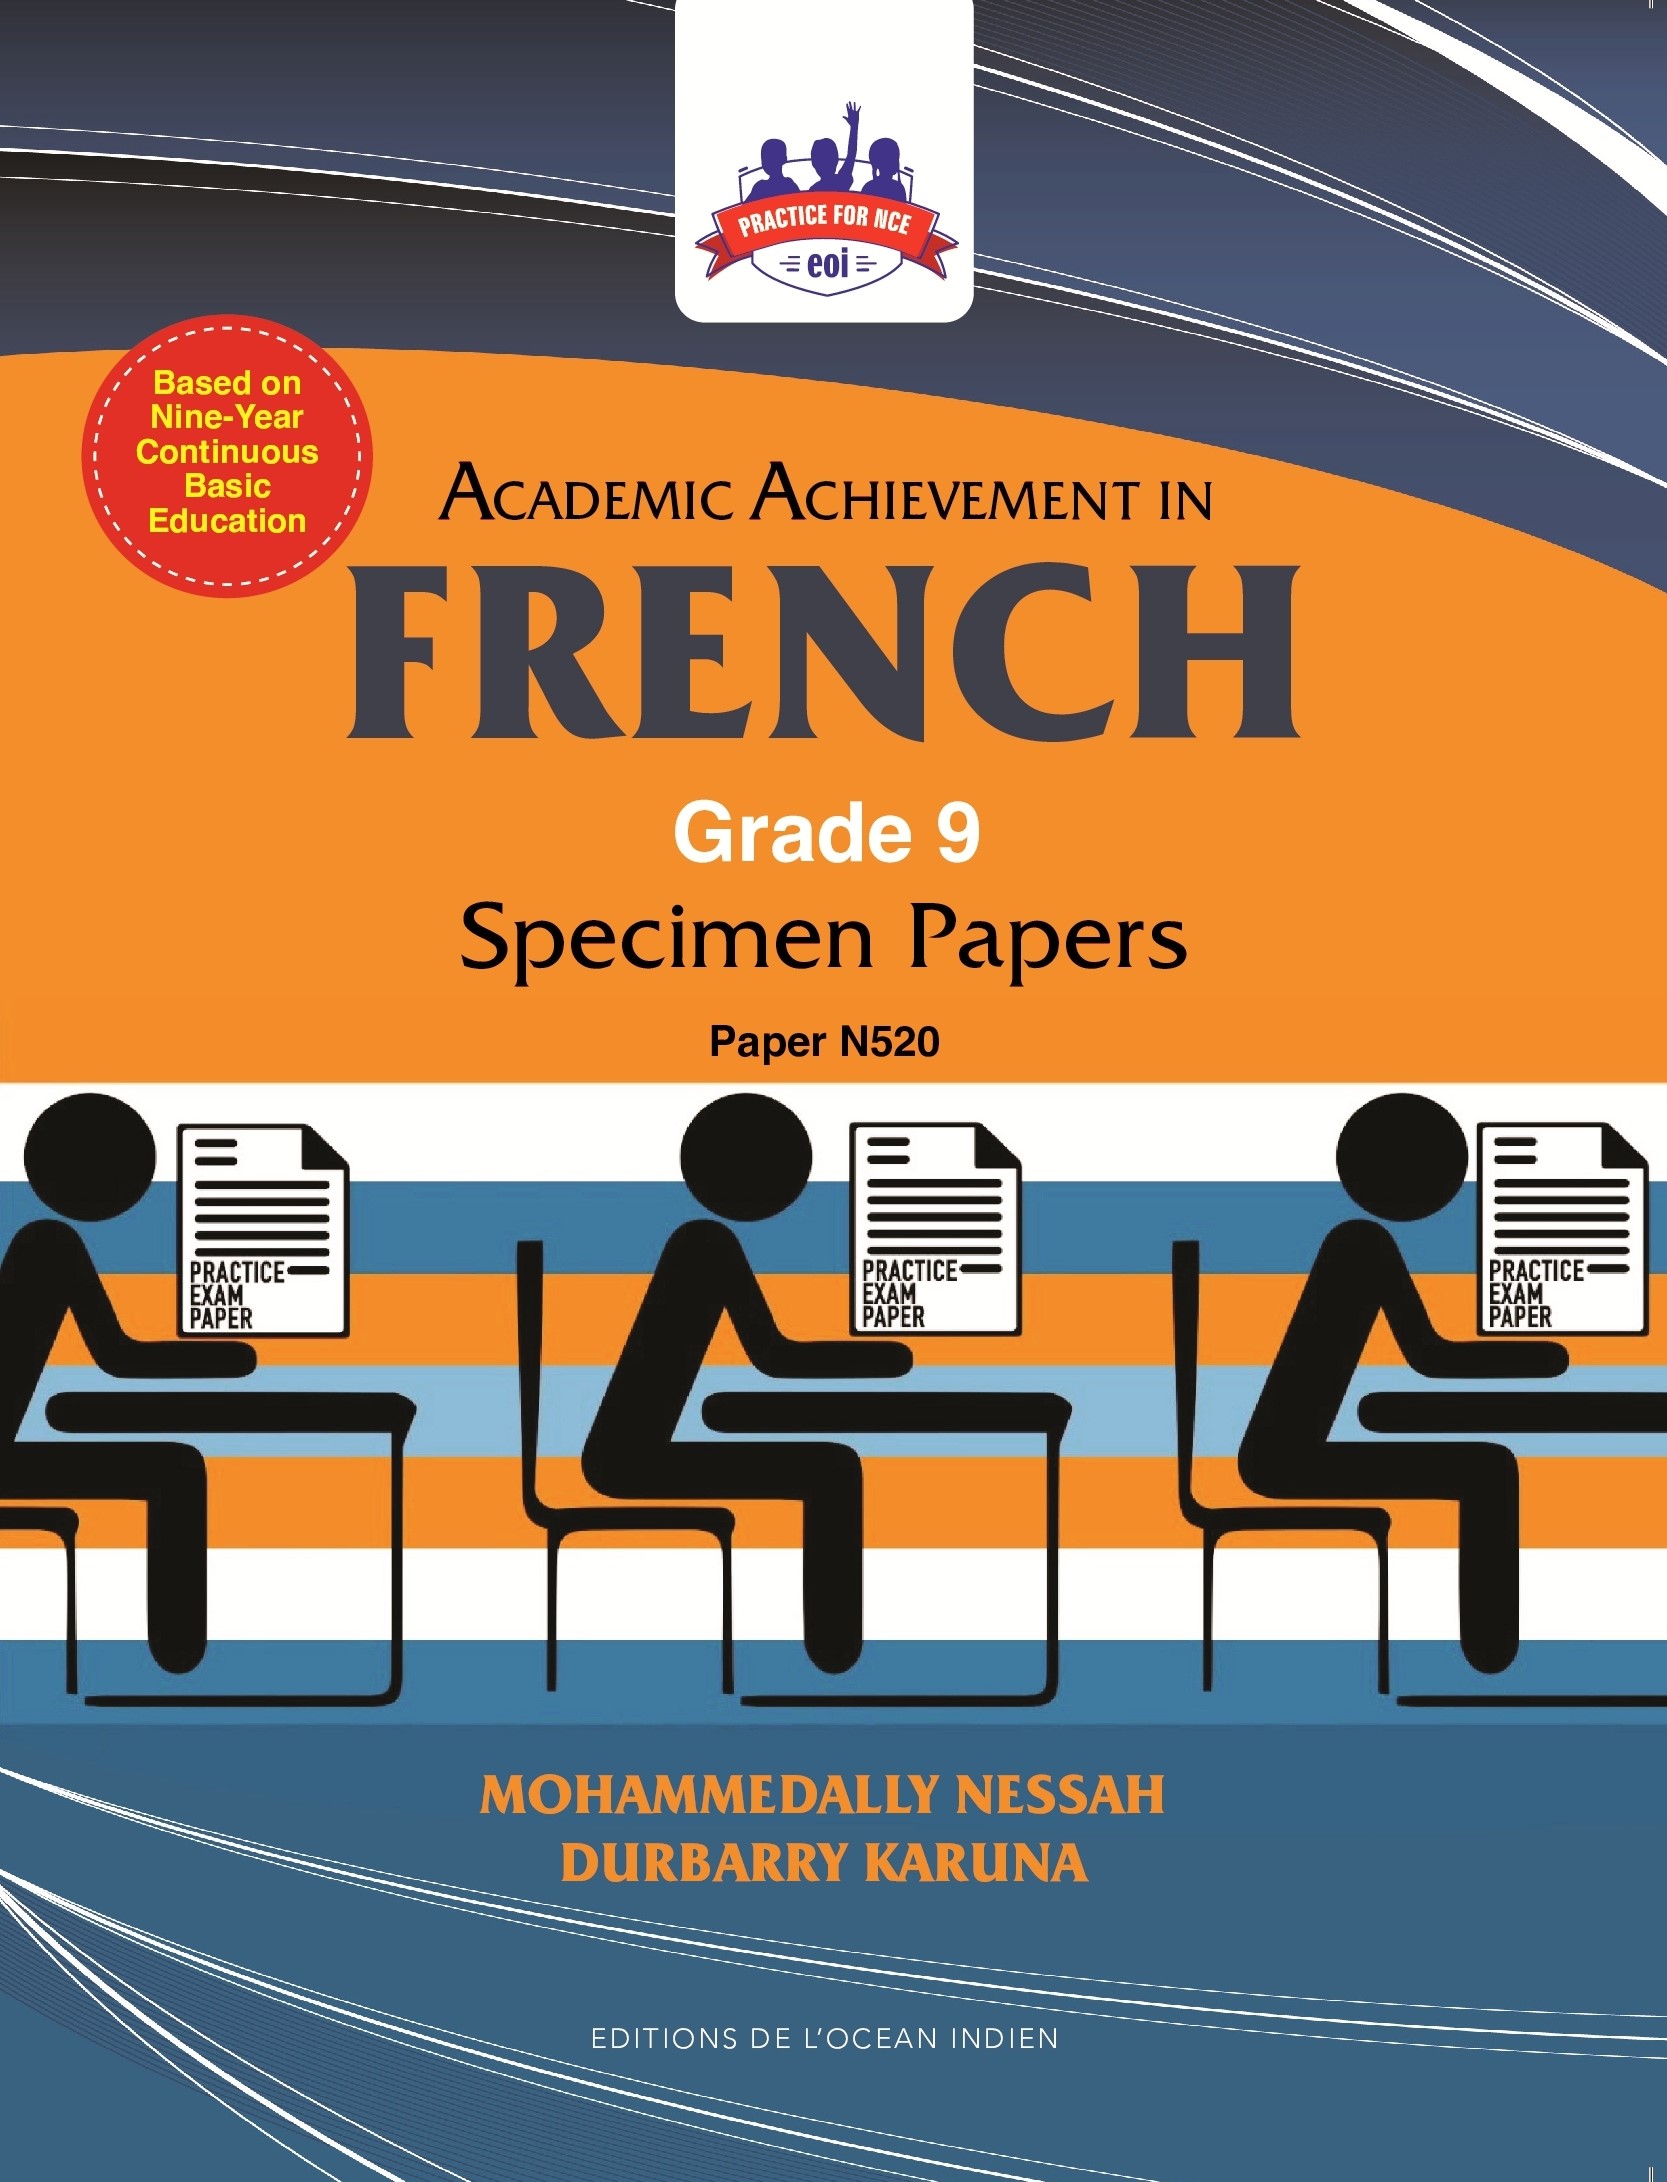 ACADEMIC ACHIEVEMENT IN FRENCH GRADE 9  SPECIMEN PAPERS